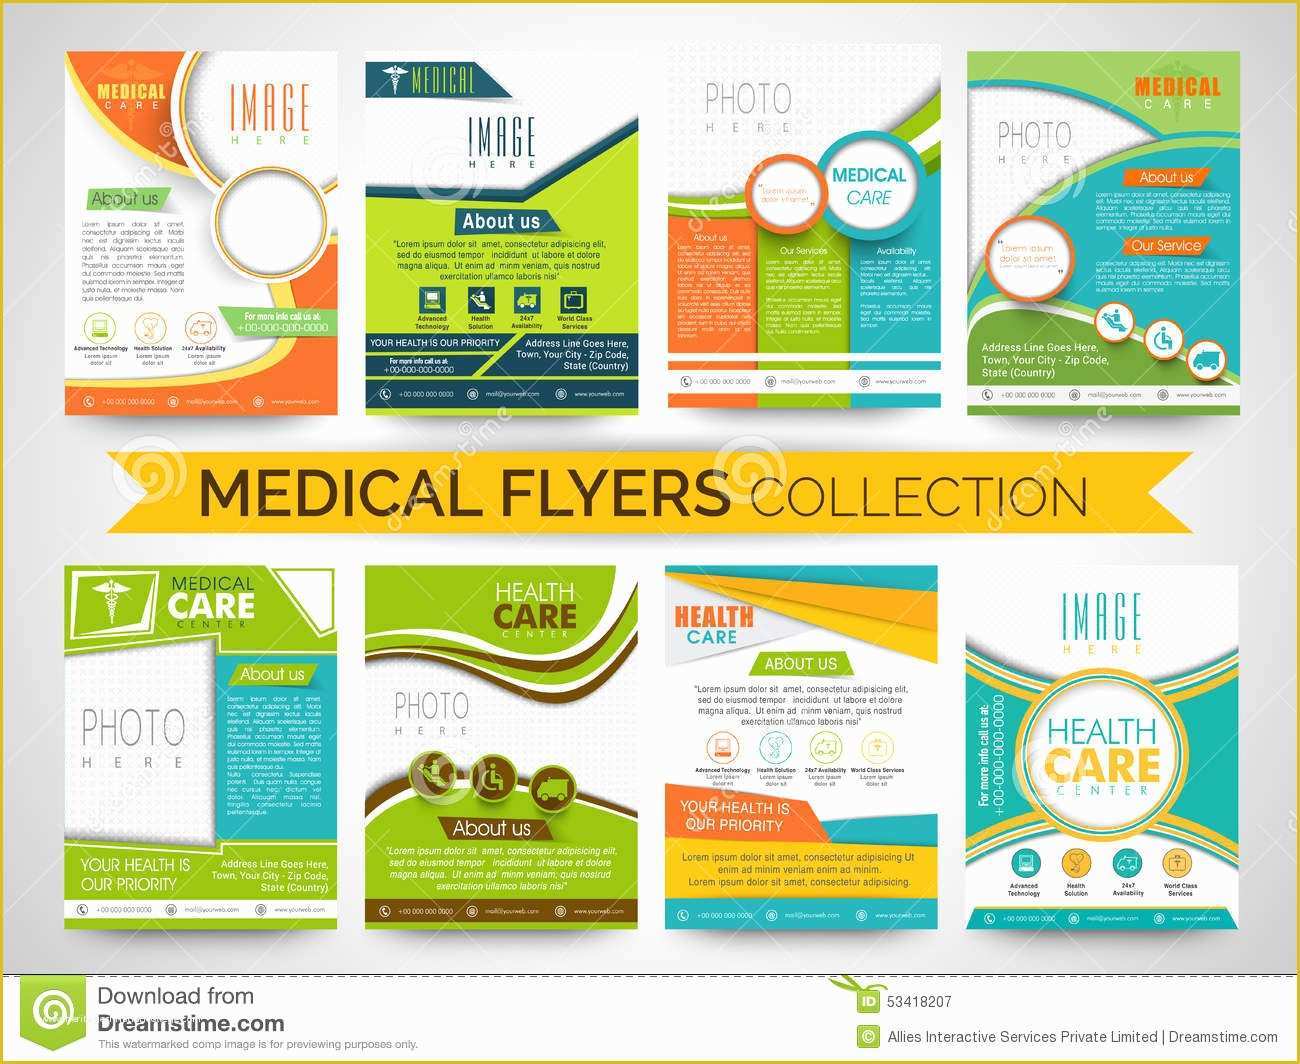 Free Templates for Flyers and Brochures Of Stylish Medical Flyers Templates Brochures Collection